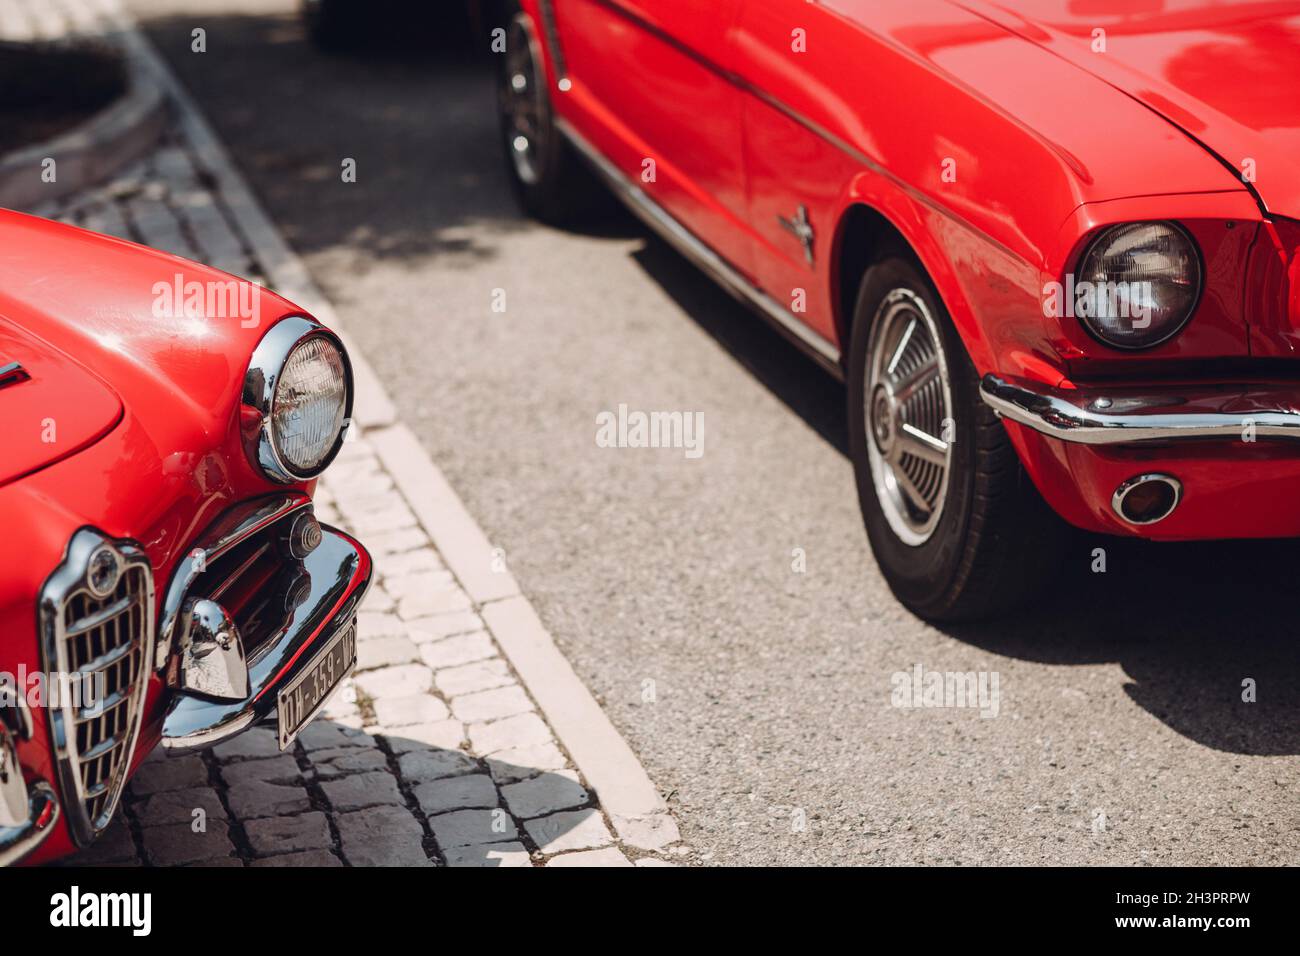 Cannes France - July 5, 2018: Retro car rally. French riviera. Nice - Cannes - Saint-Tropez. Red Alfa-Romeo Stock Photo